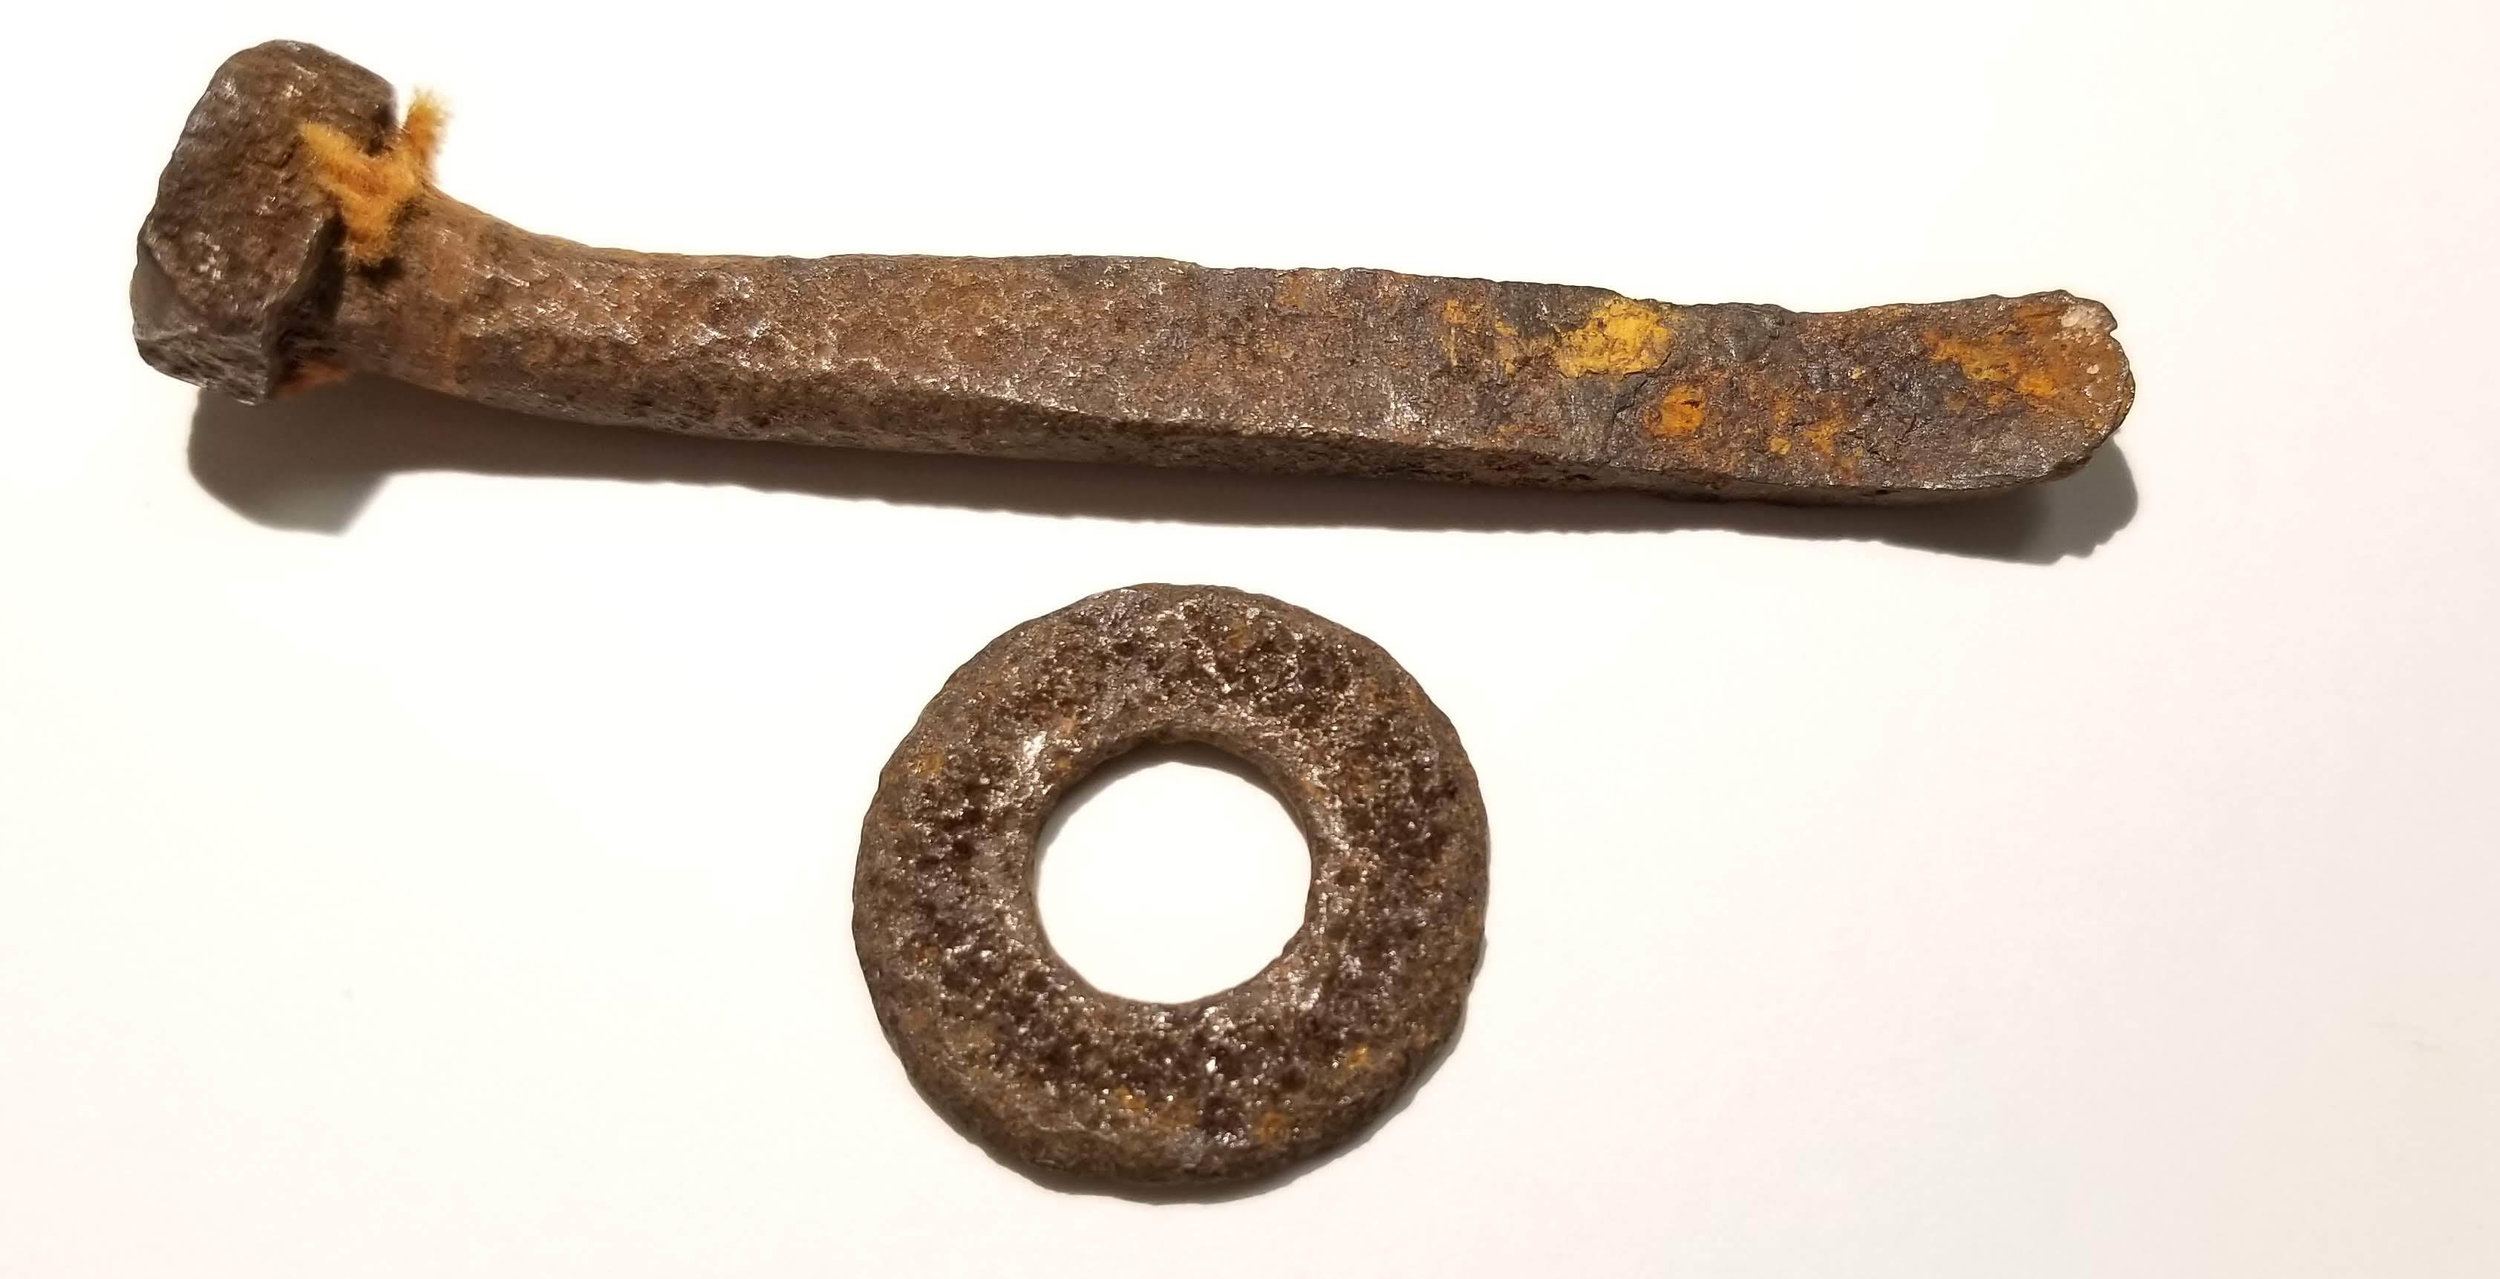 Bolt and washer piton